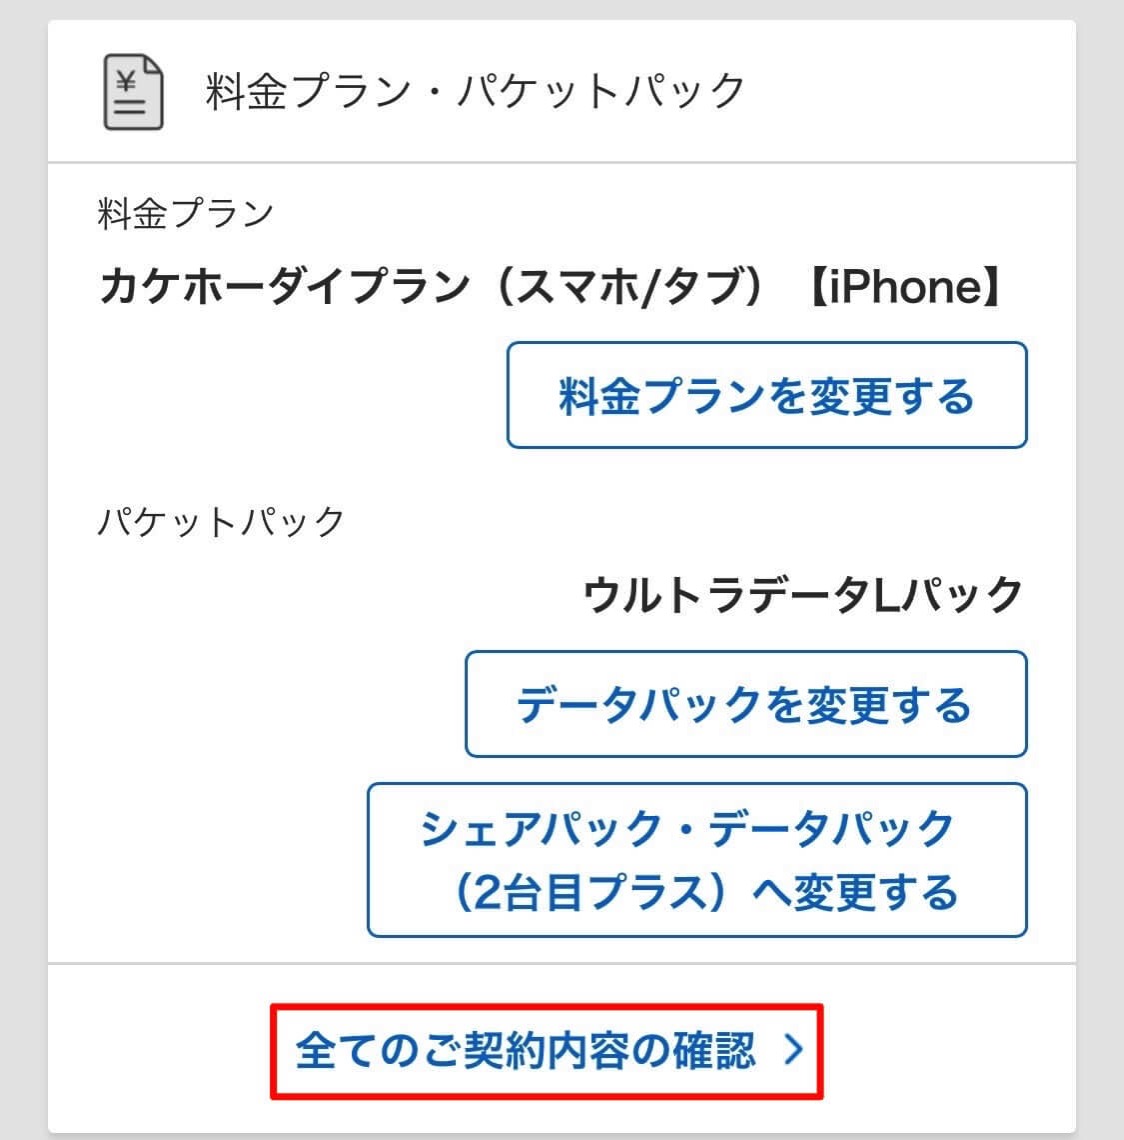 The docomo one number service cancellation of a contract 2